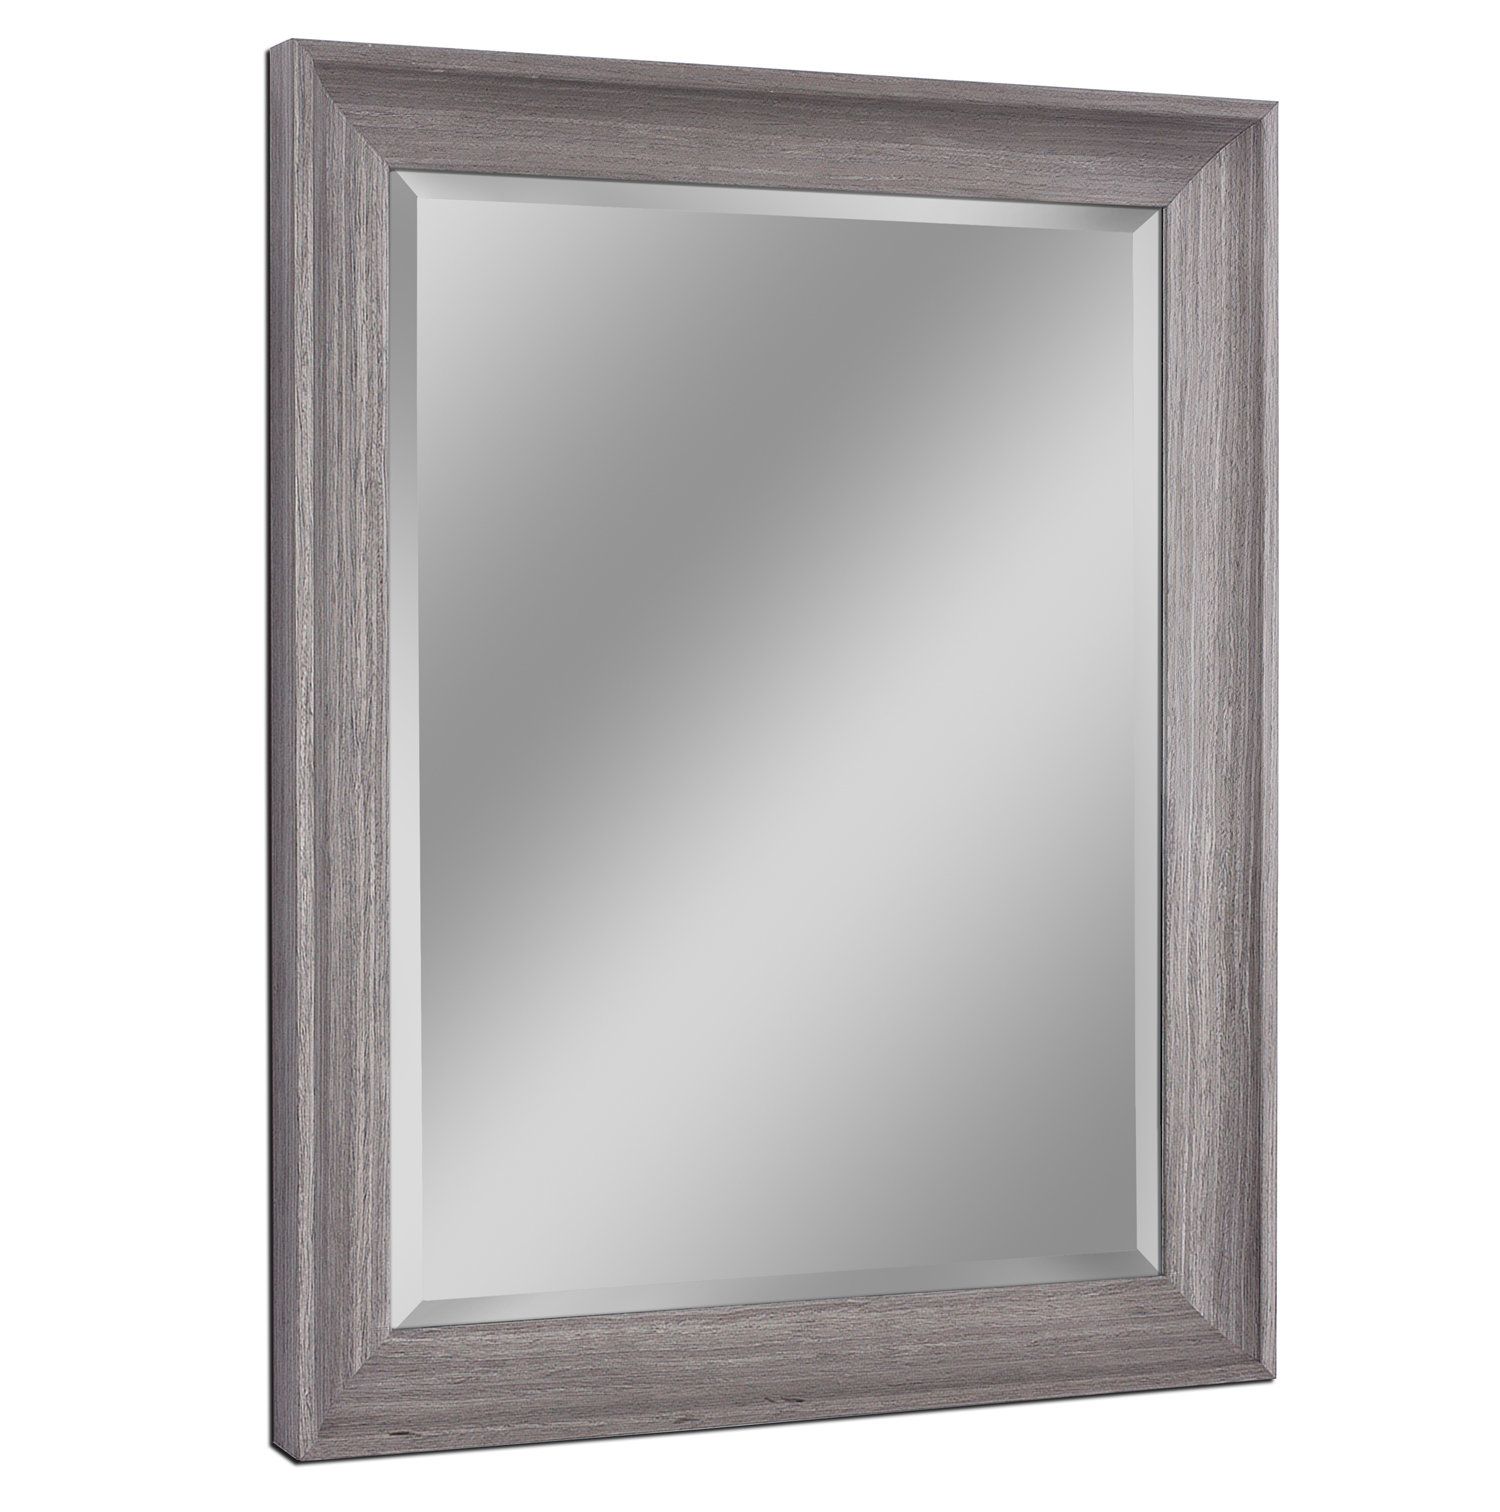 Farmhouse & Rustic Three Posts Wall & Accent Mirrors | Birch Intended For Boyers Wall Mirrors (View 23 of 30)